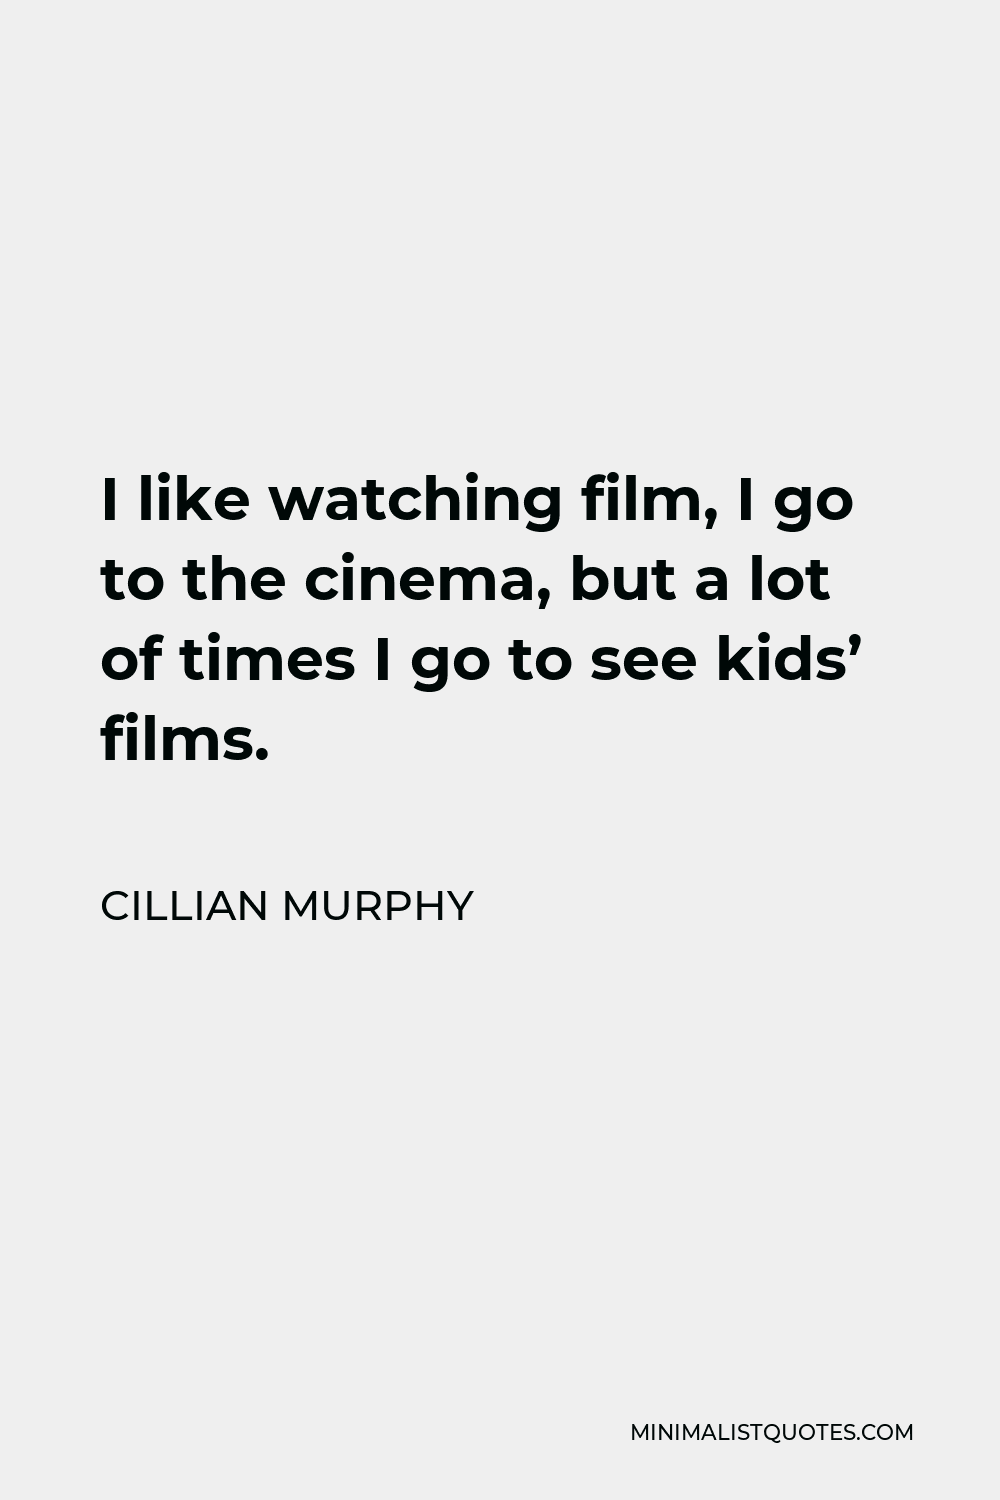 Cillian Murphy Quote - I like watching film, I go to the cinema, but a lot of times I go to see kids’ films.